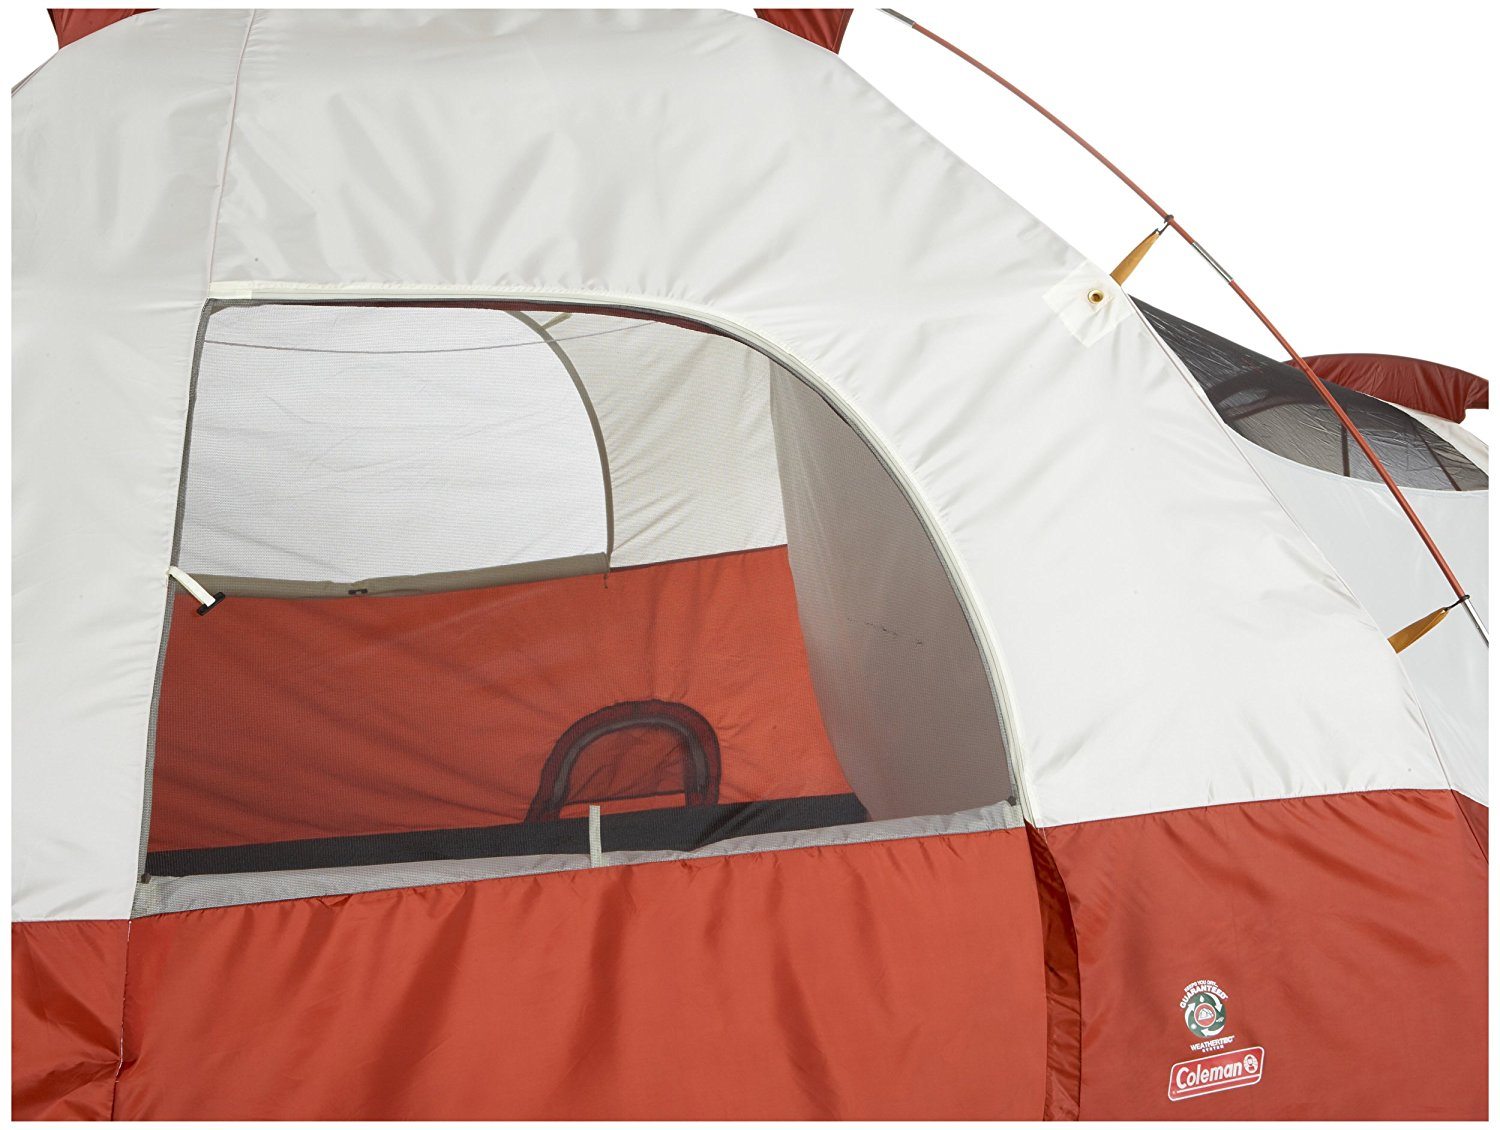 COLEMAN RED CANYON 8 PERSON TENT window